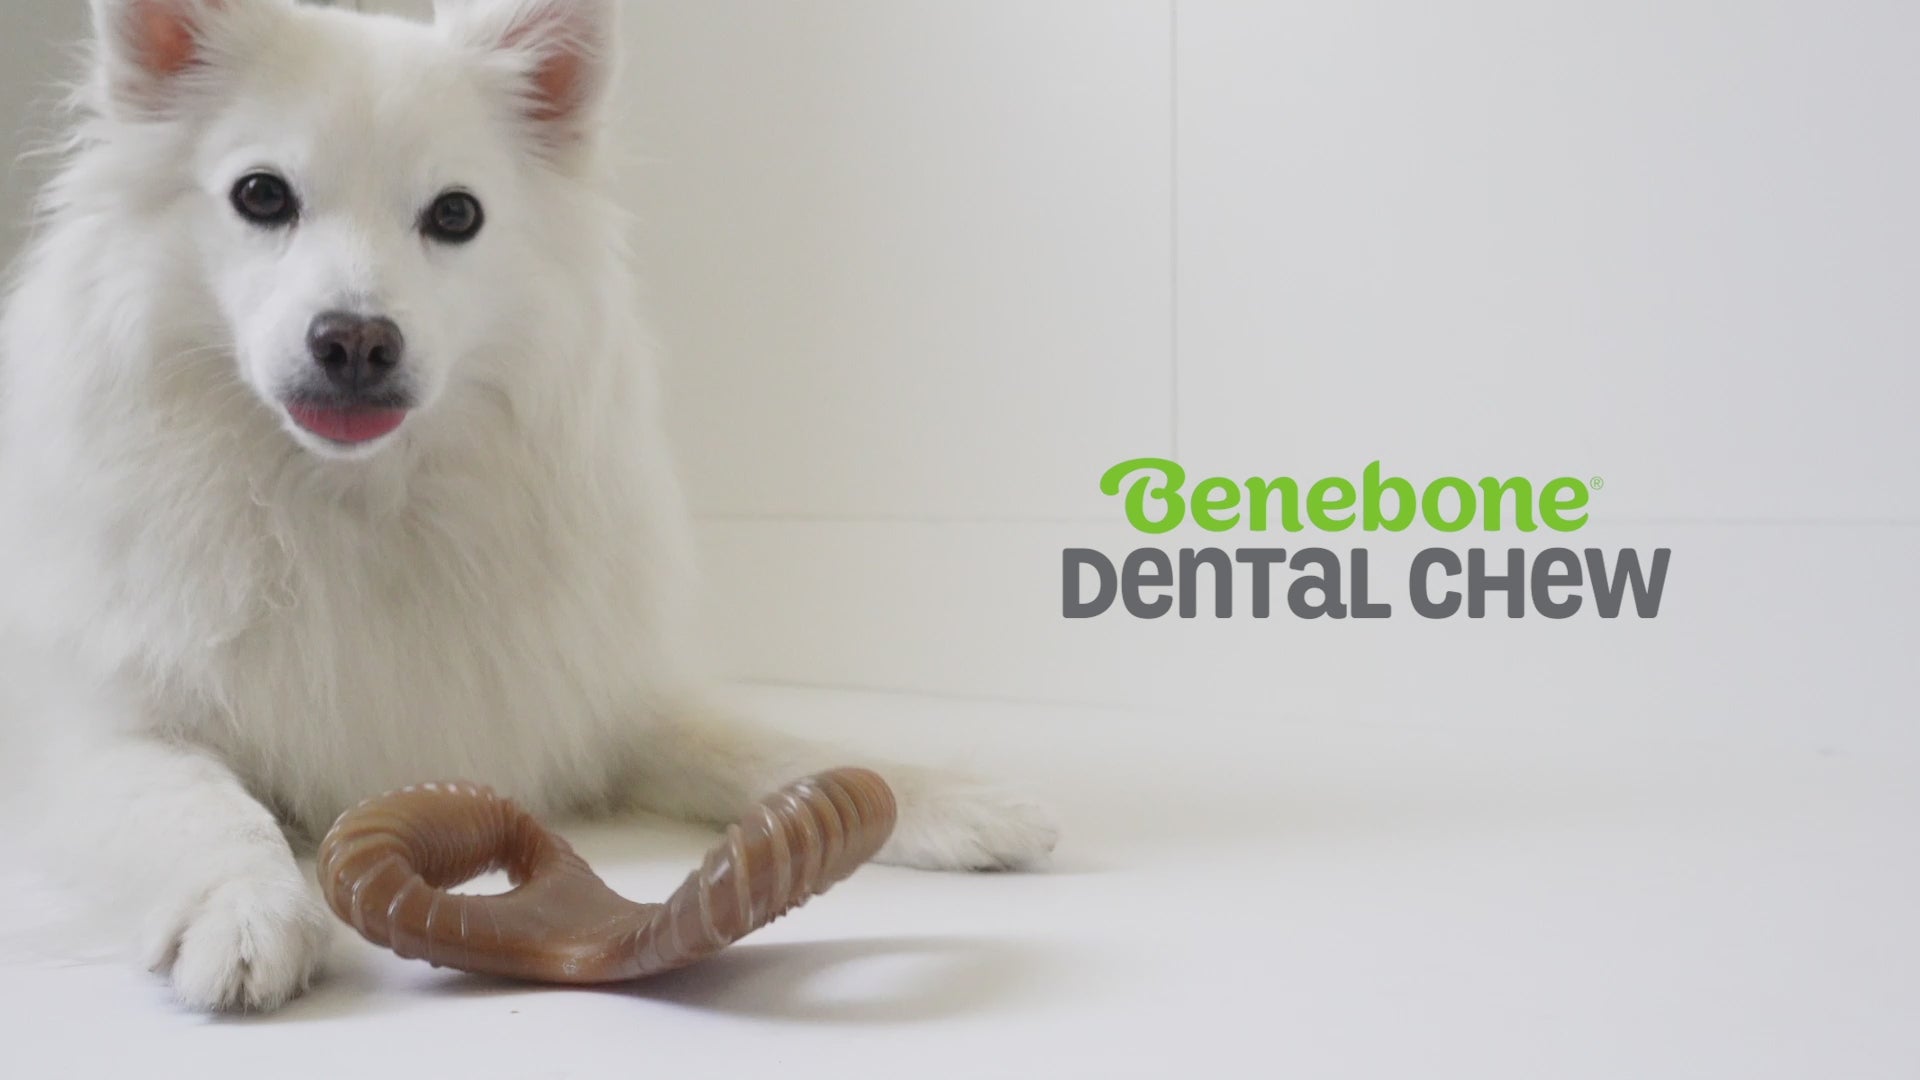 Benebone dental chew video with music only no talking